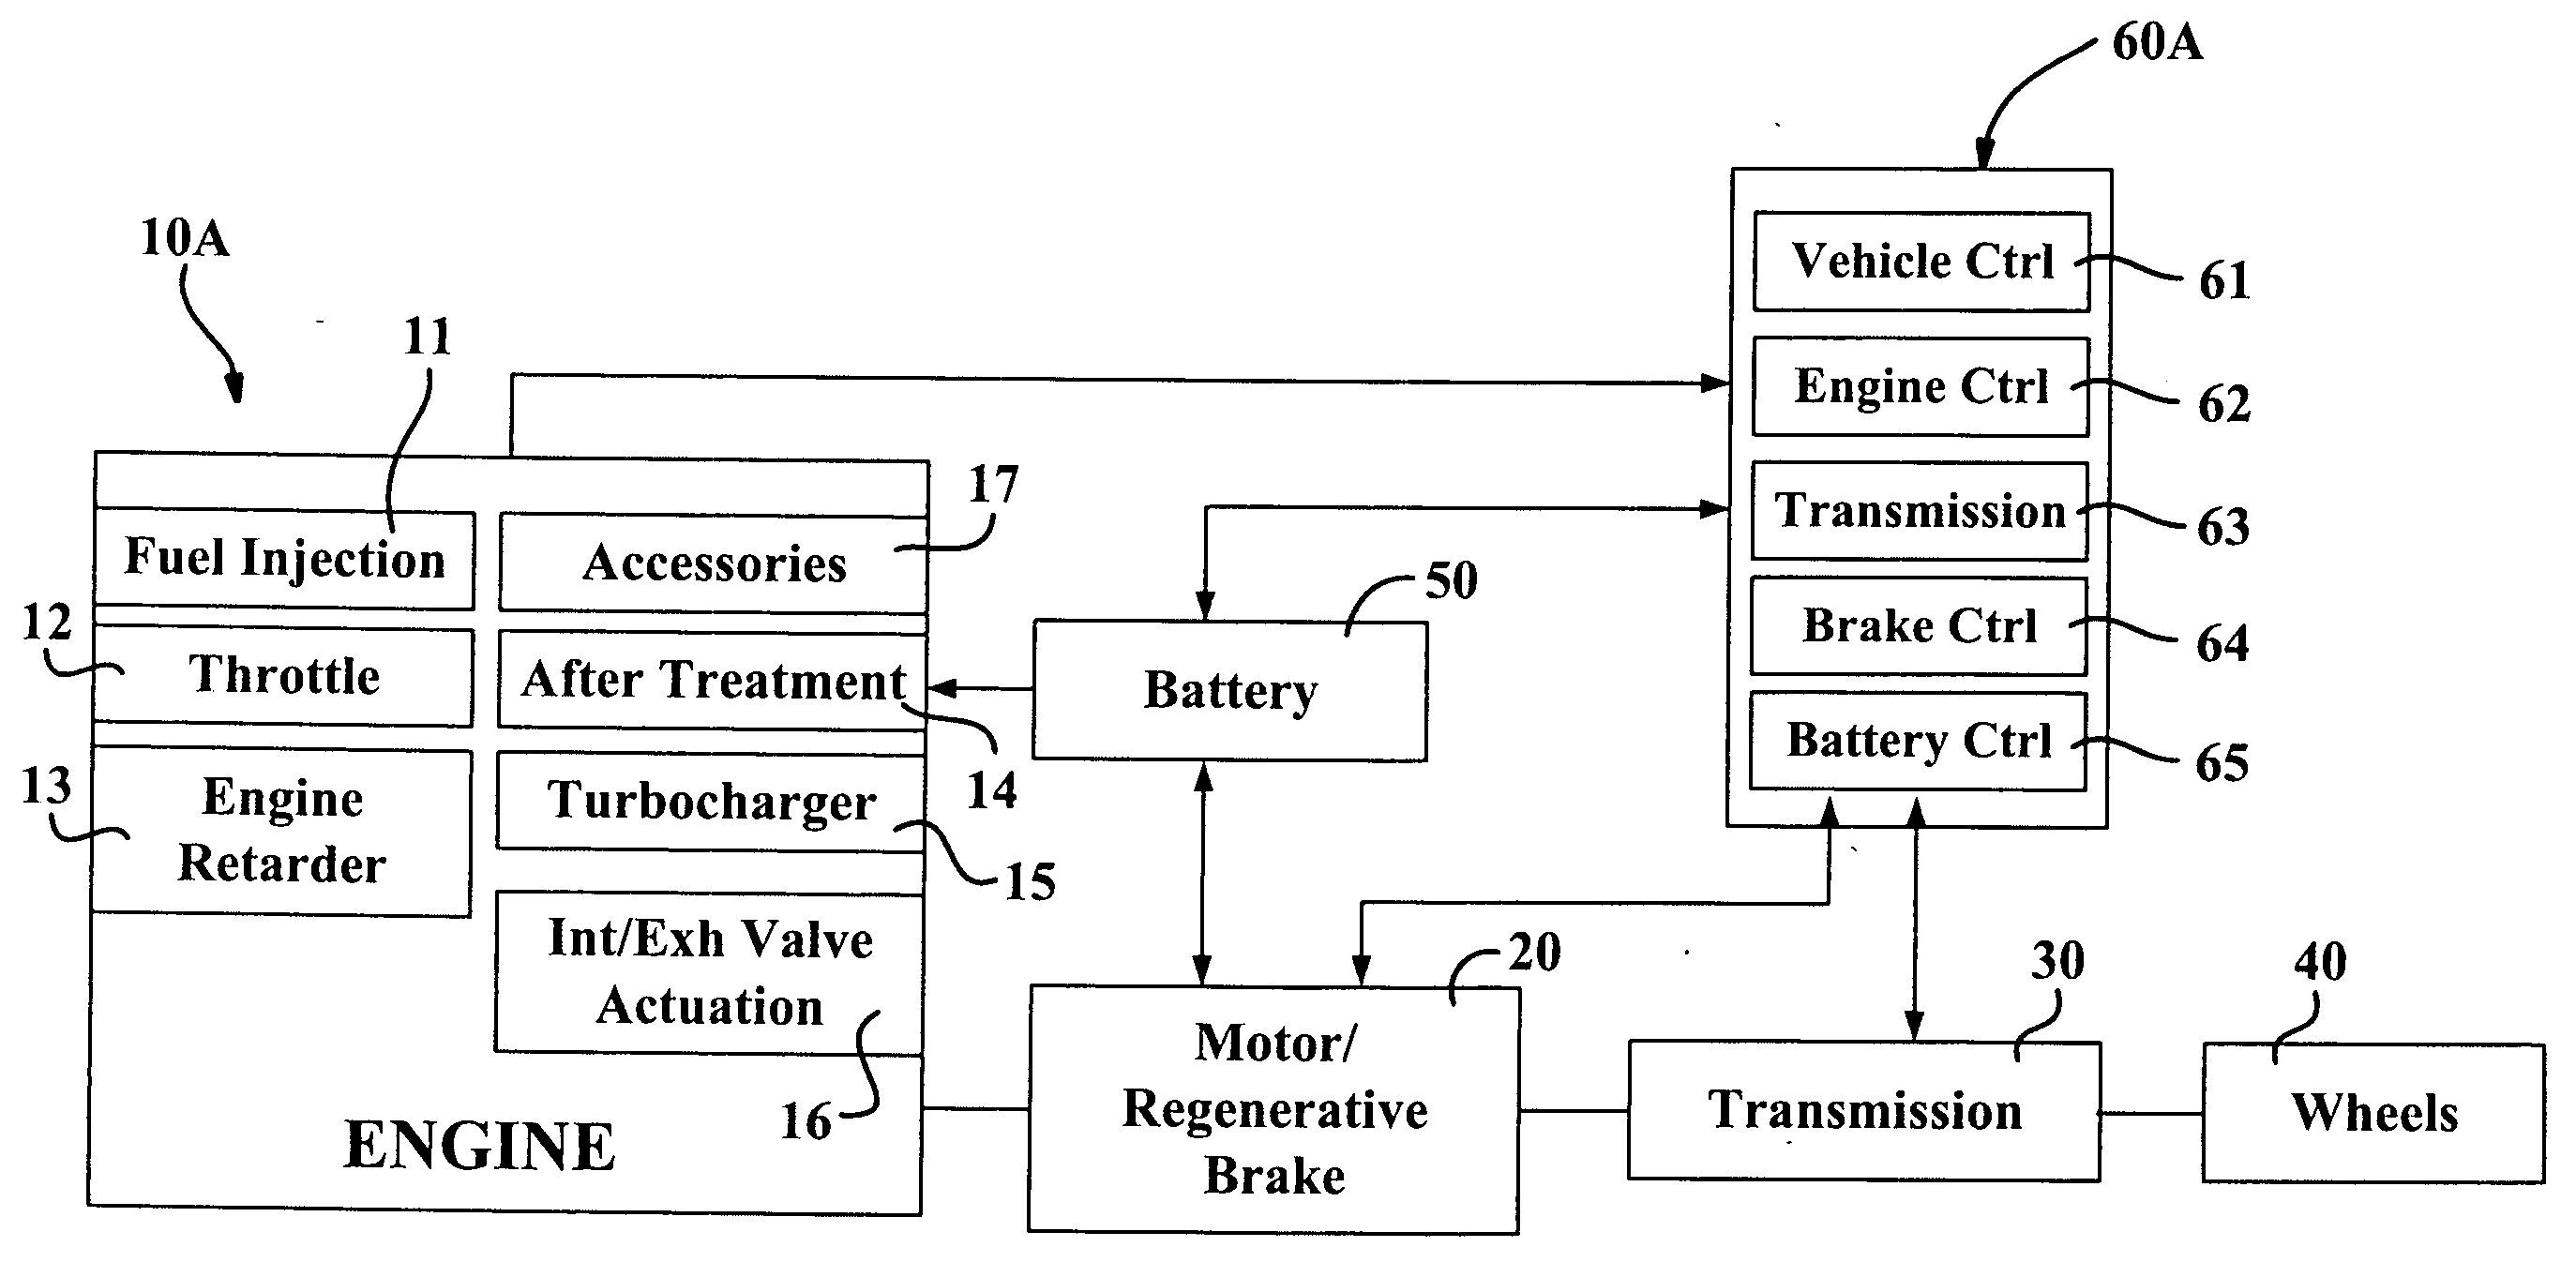 Internal combustion engines for hybrid power train